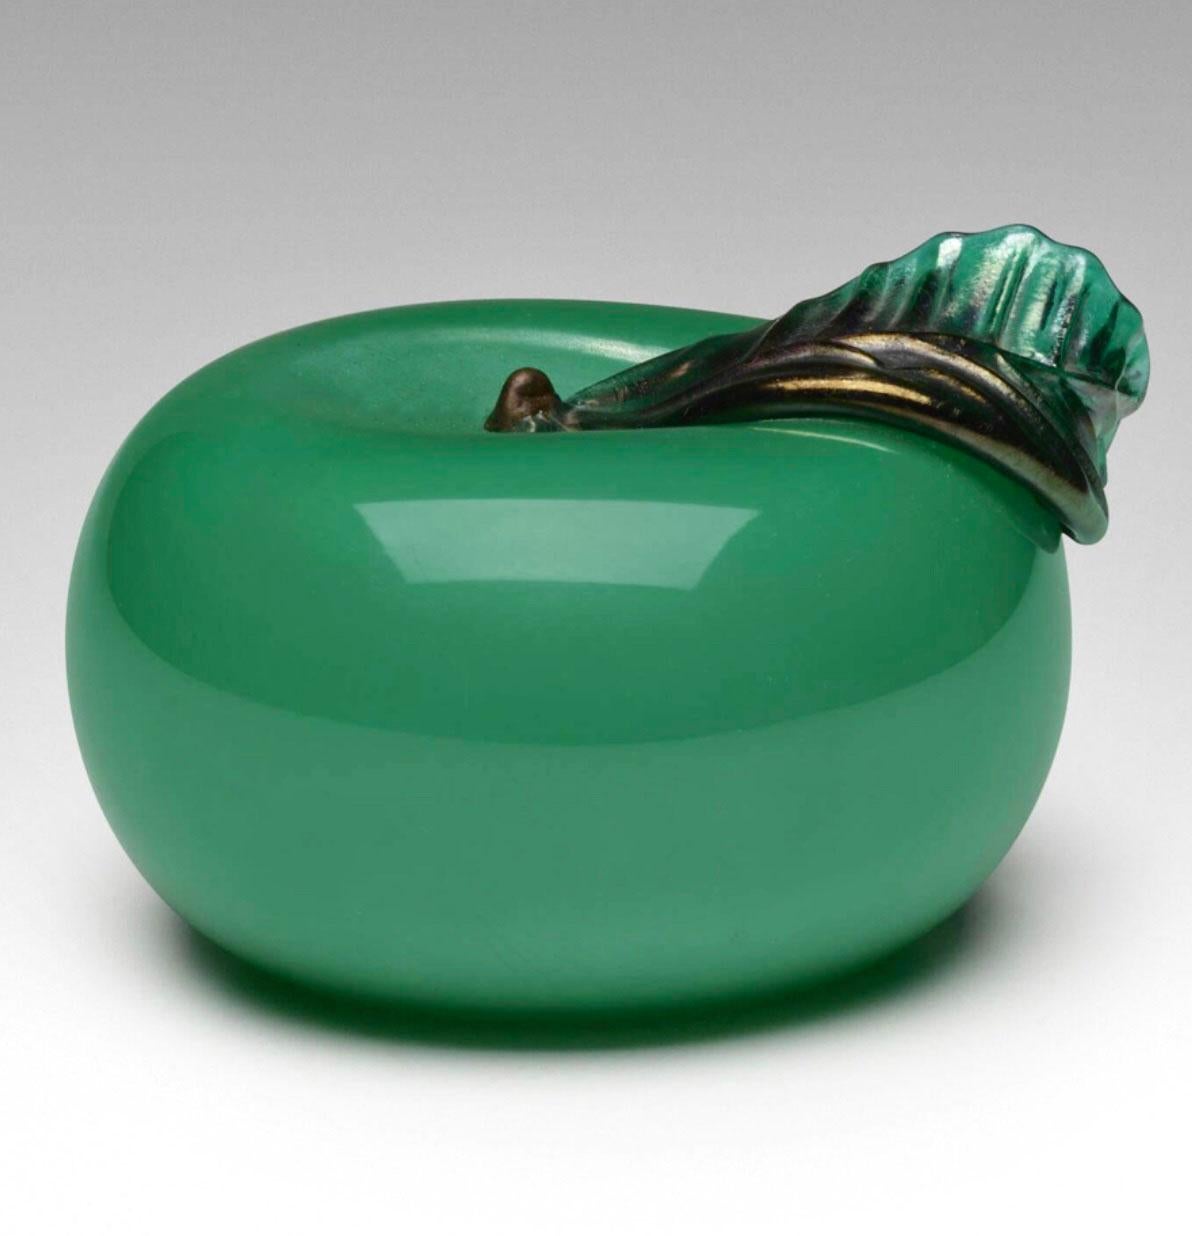 Napoleone Martinuzzi for Venini Green Apple Glass Sculpture, Italy, 1926, signed In Good Condition For Sale In Brooklyn, NY